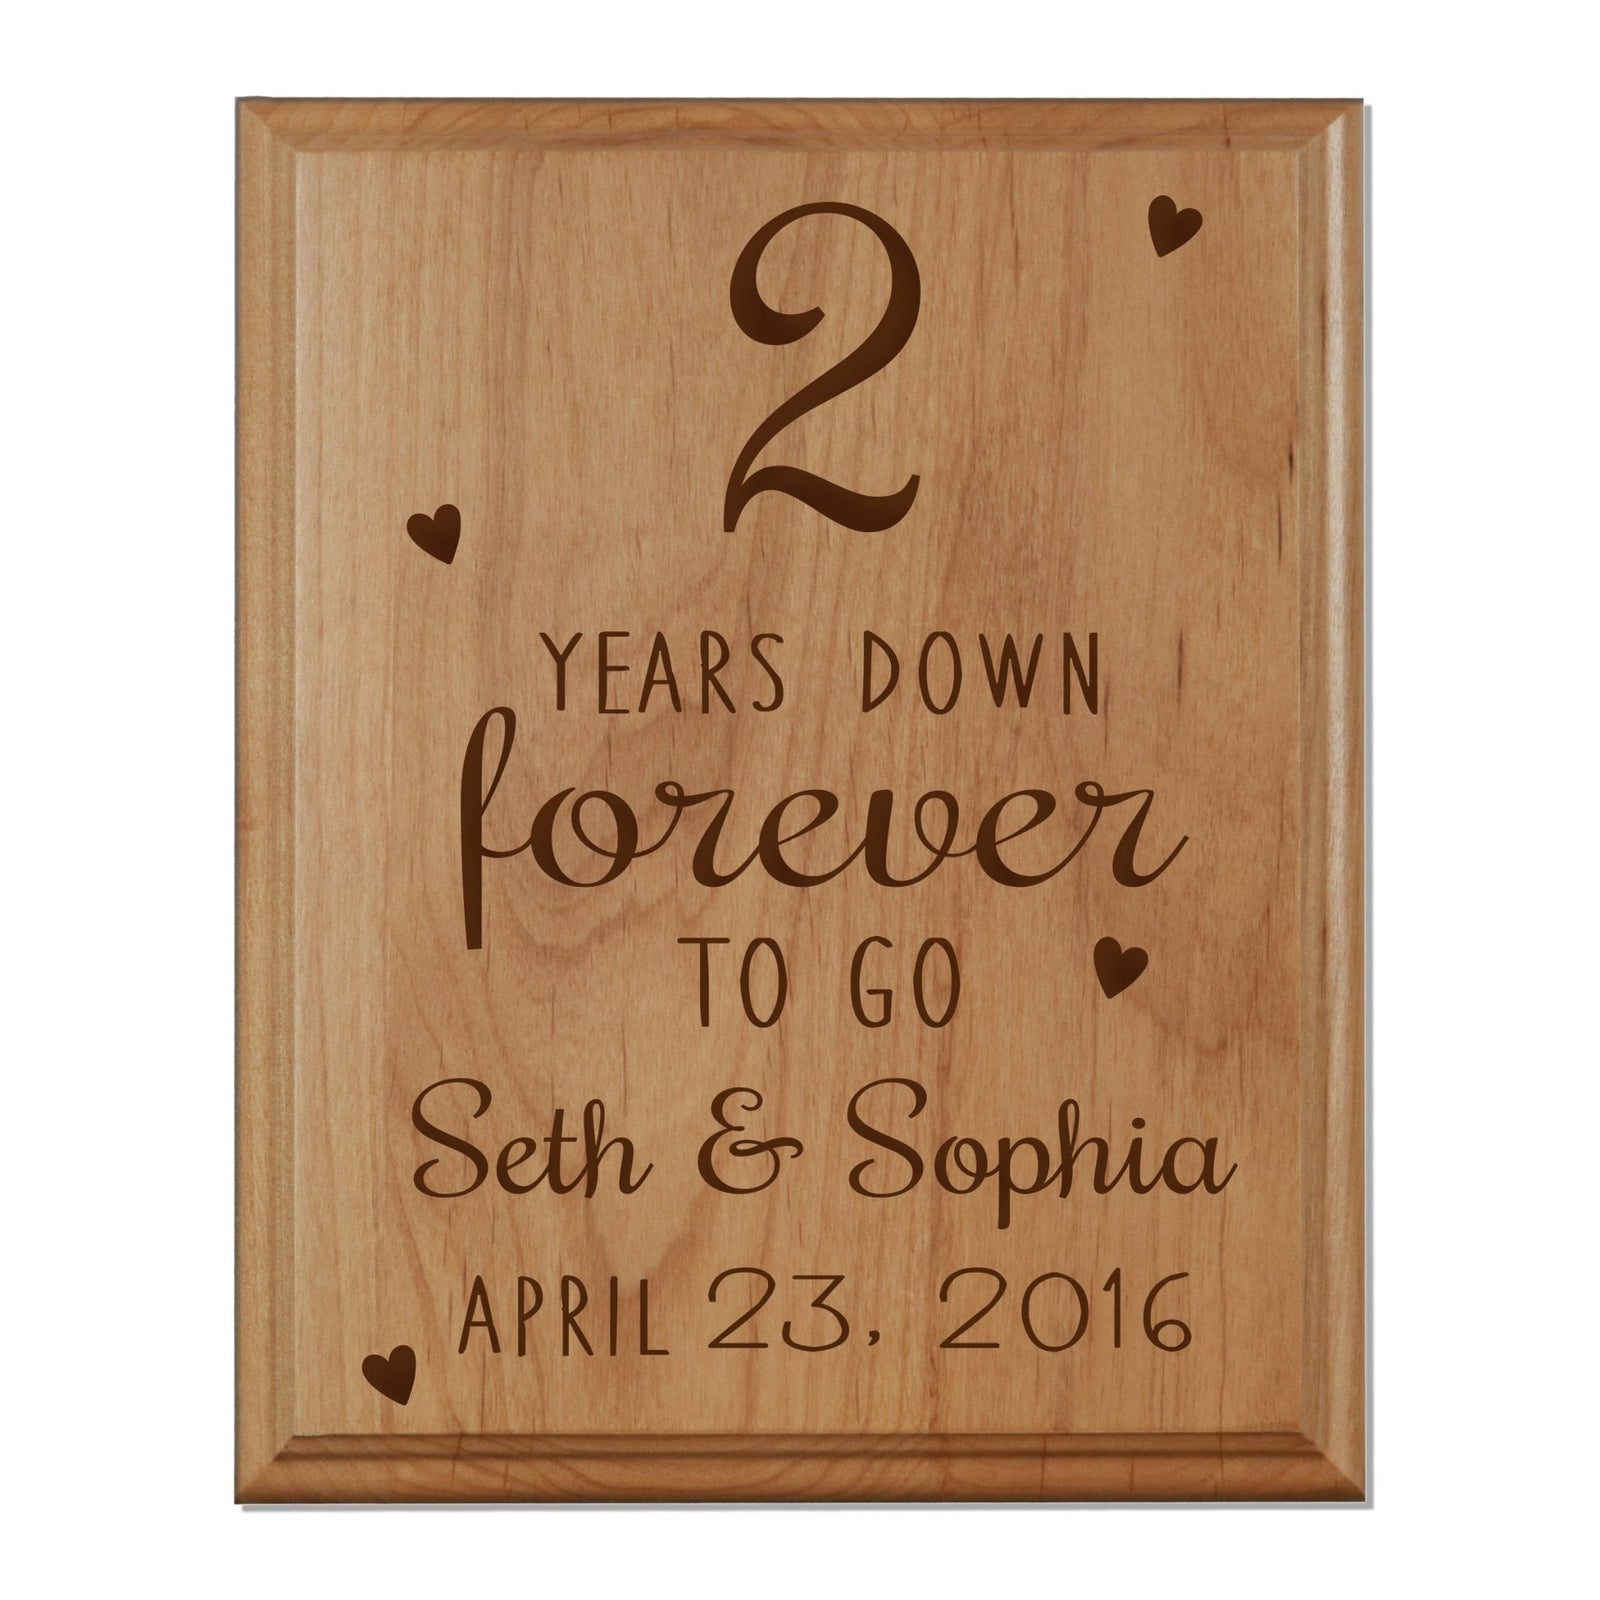 Personalized 8x10 Anniversary Plaques - 2 Year Down - LifeSong Milestones